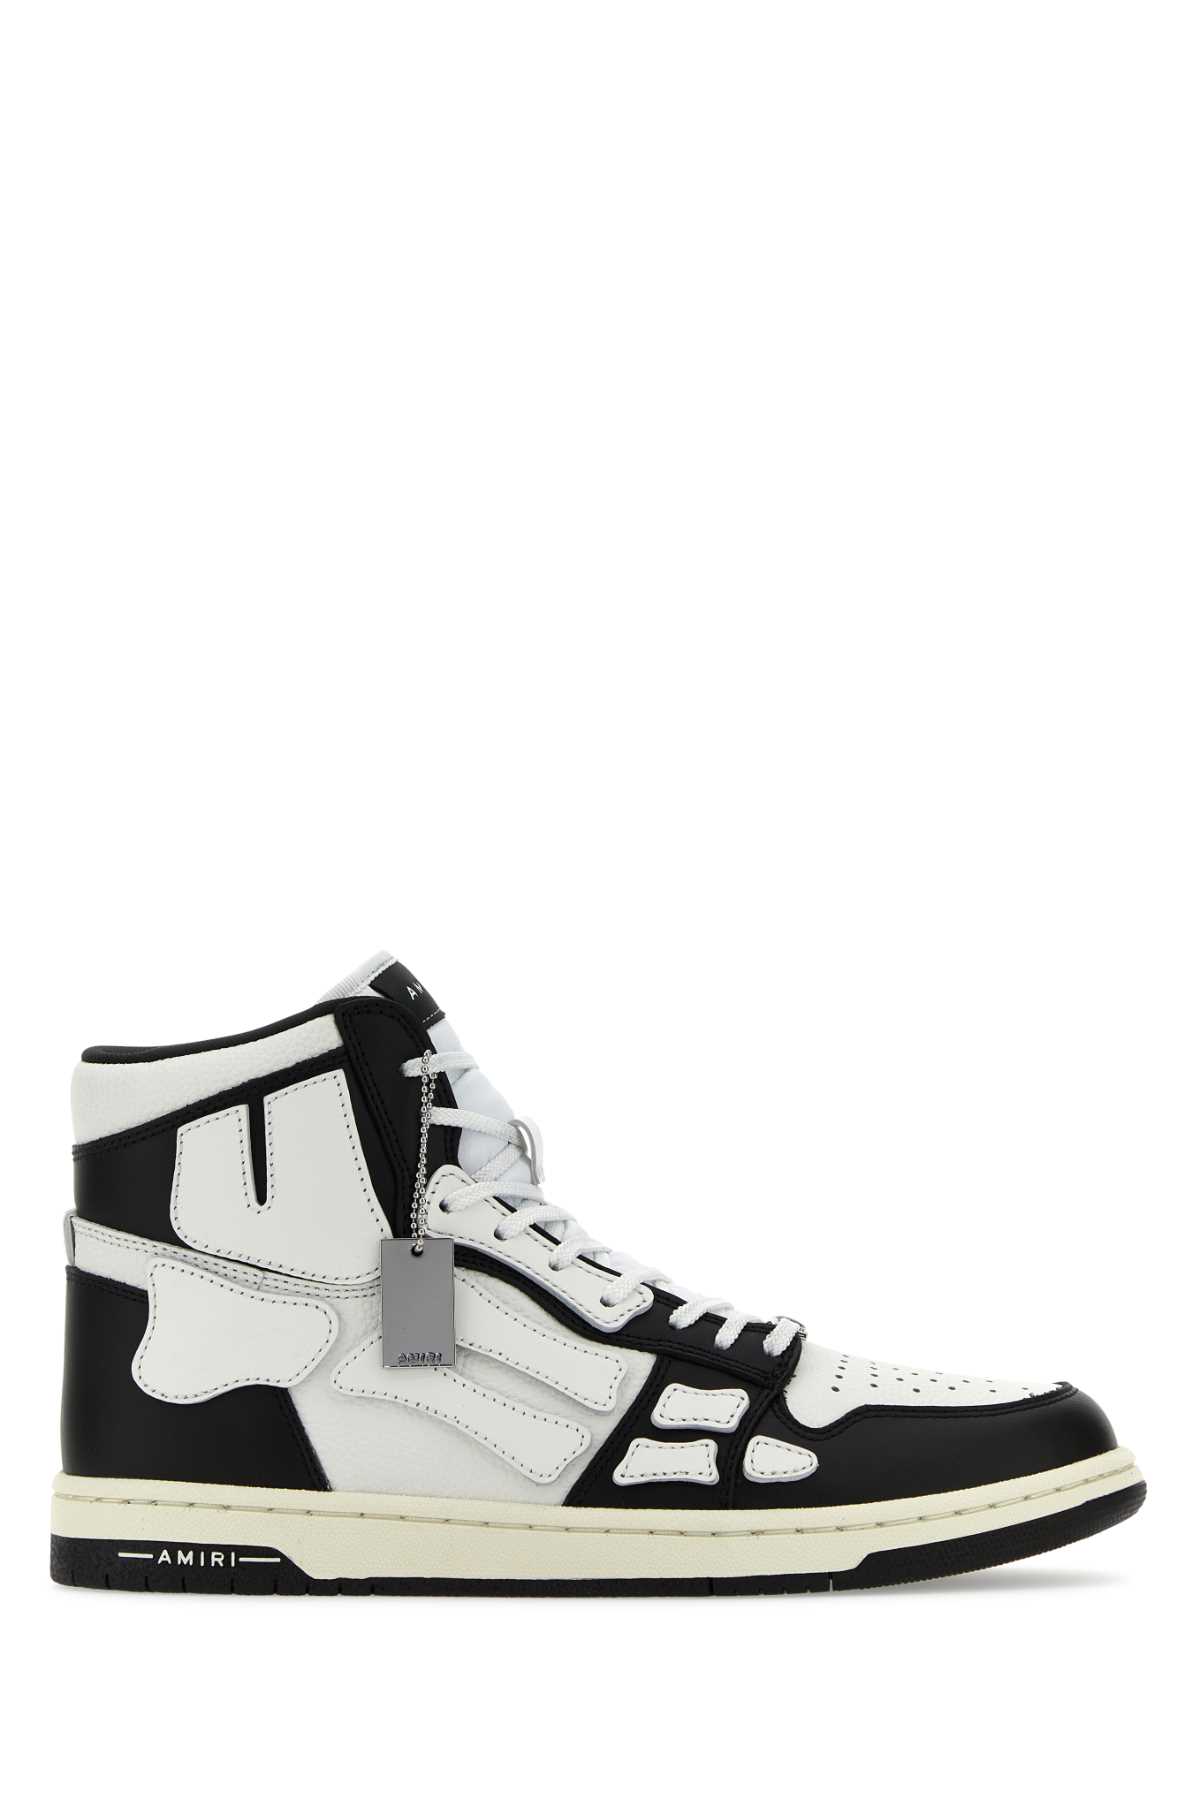 Two-tone Leather Skel Sneakers